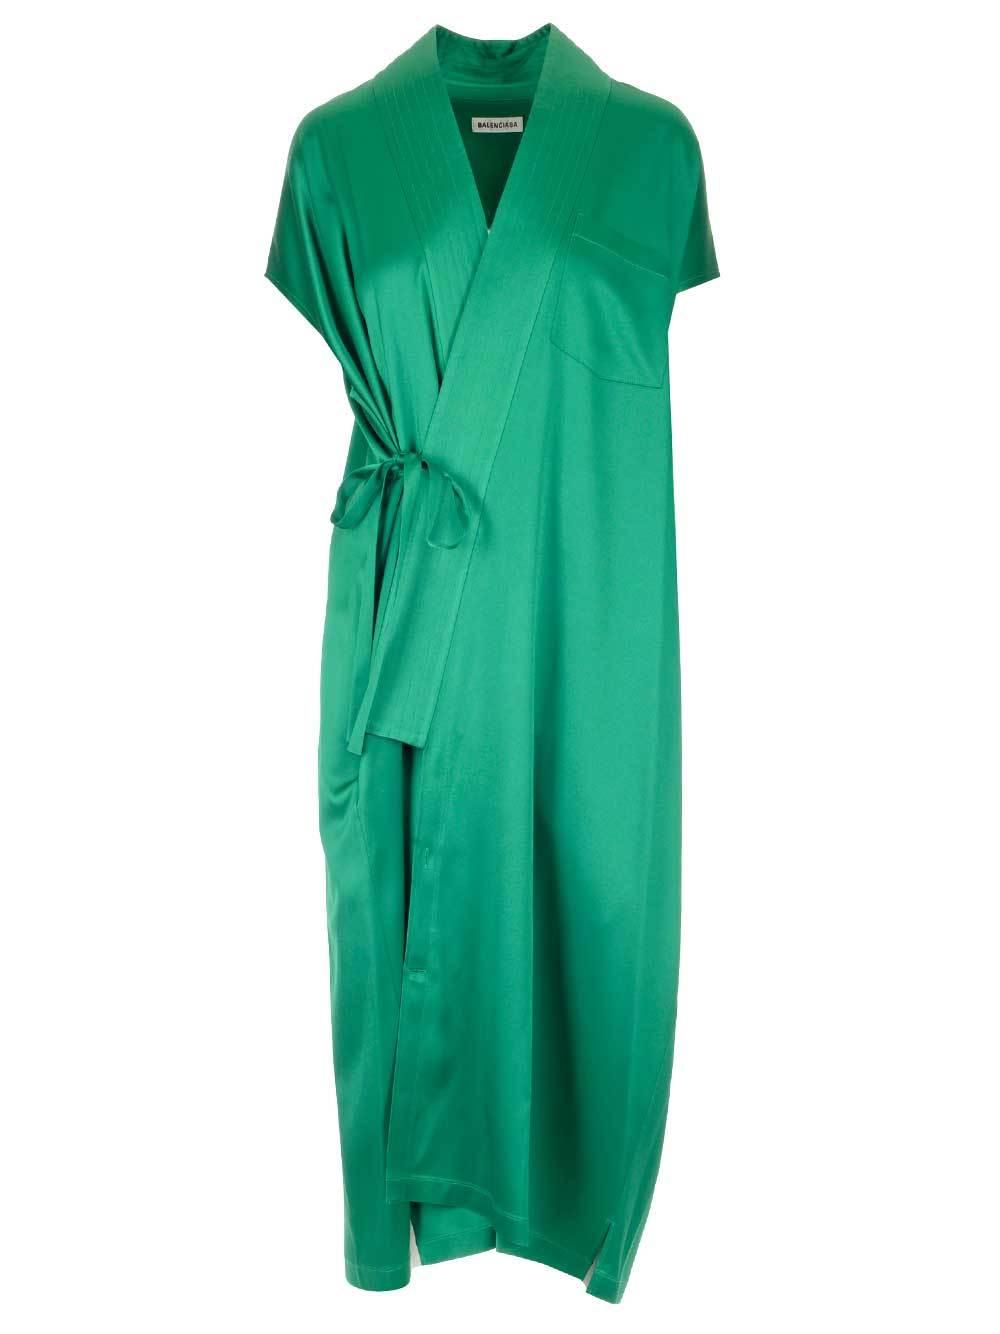 Balenciaga Synthetic Wrap Front Dress in Green - Lyst